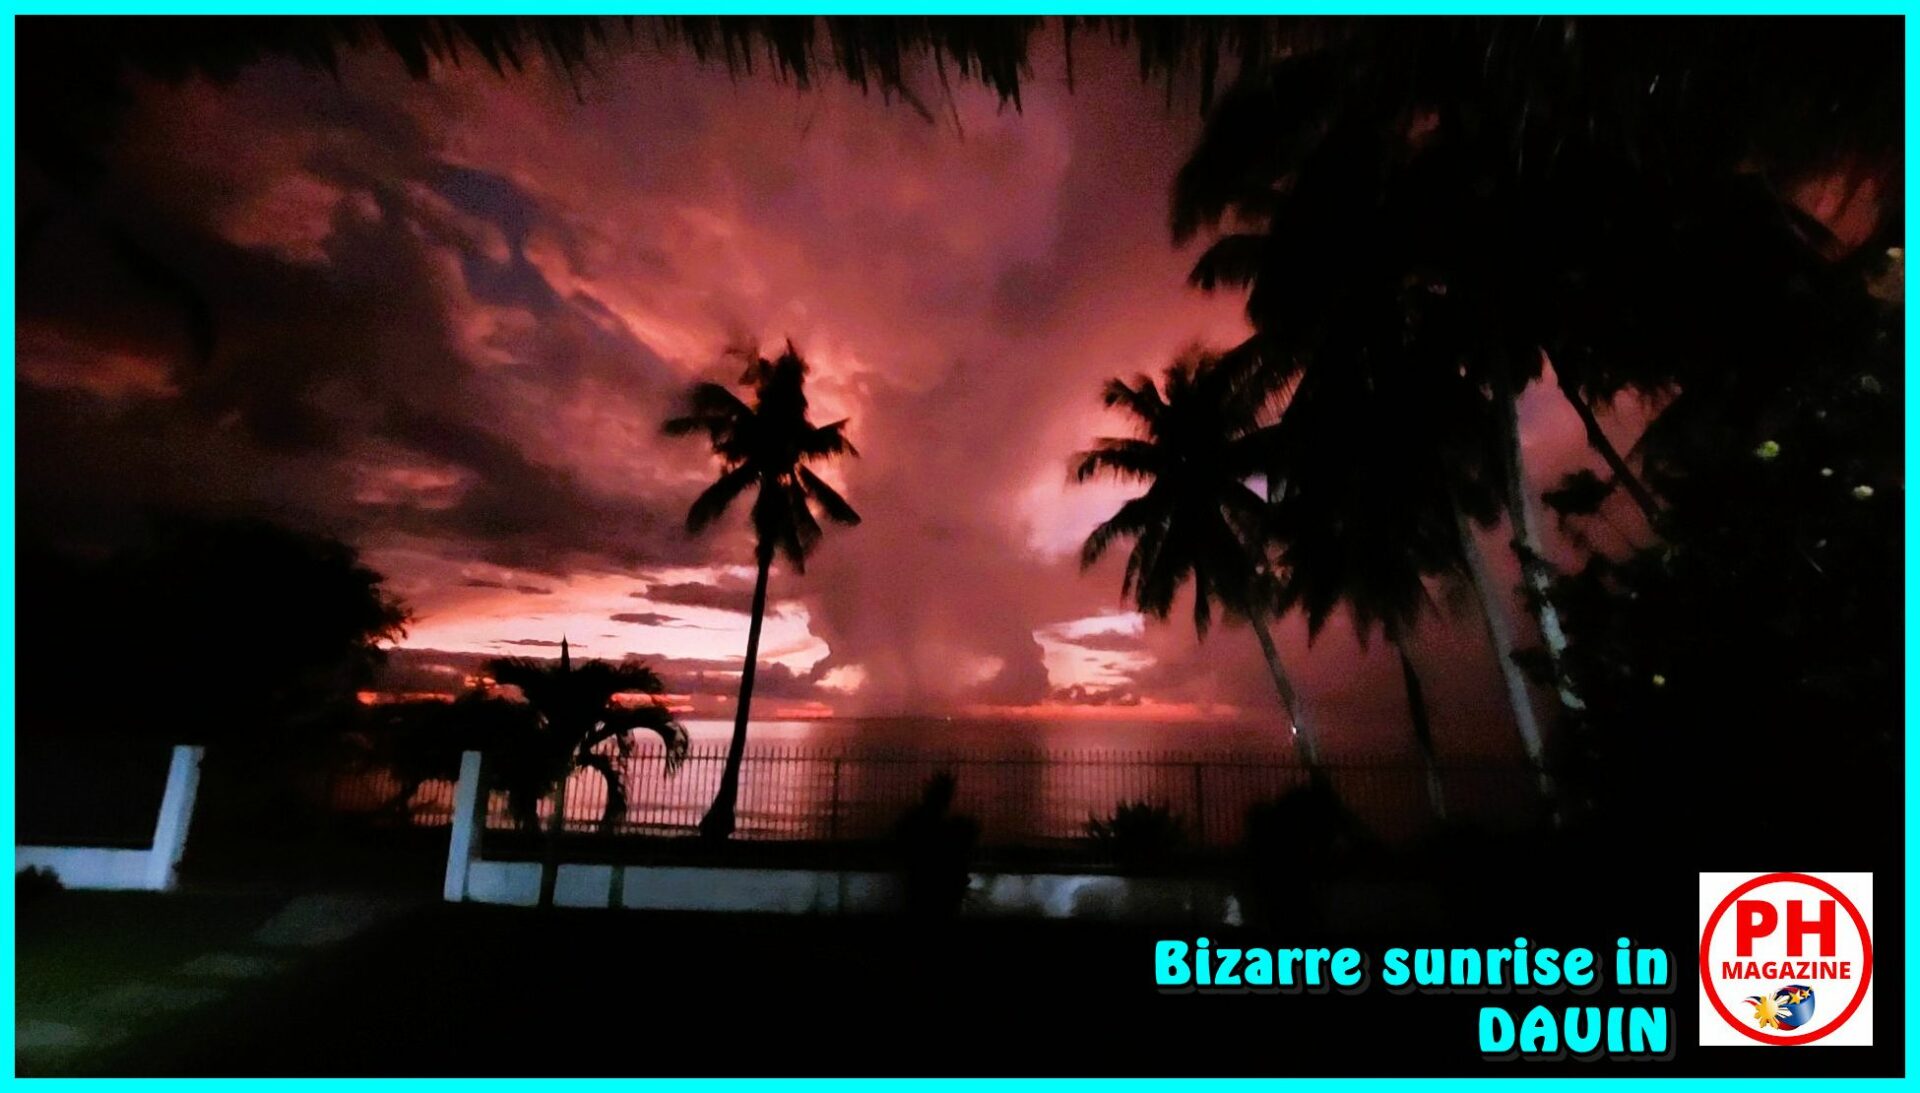 SIGHTS OF NEGROS - PHOTO OF THE DAY - Bizarre sunrise in Dauin